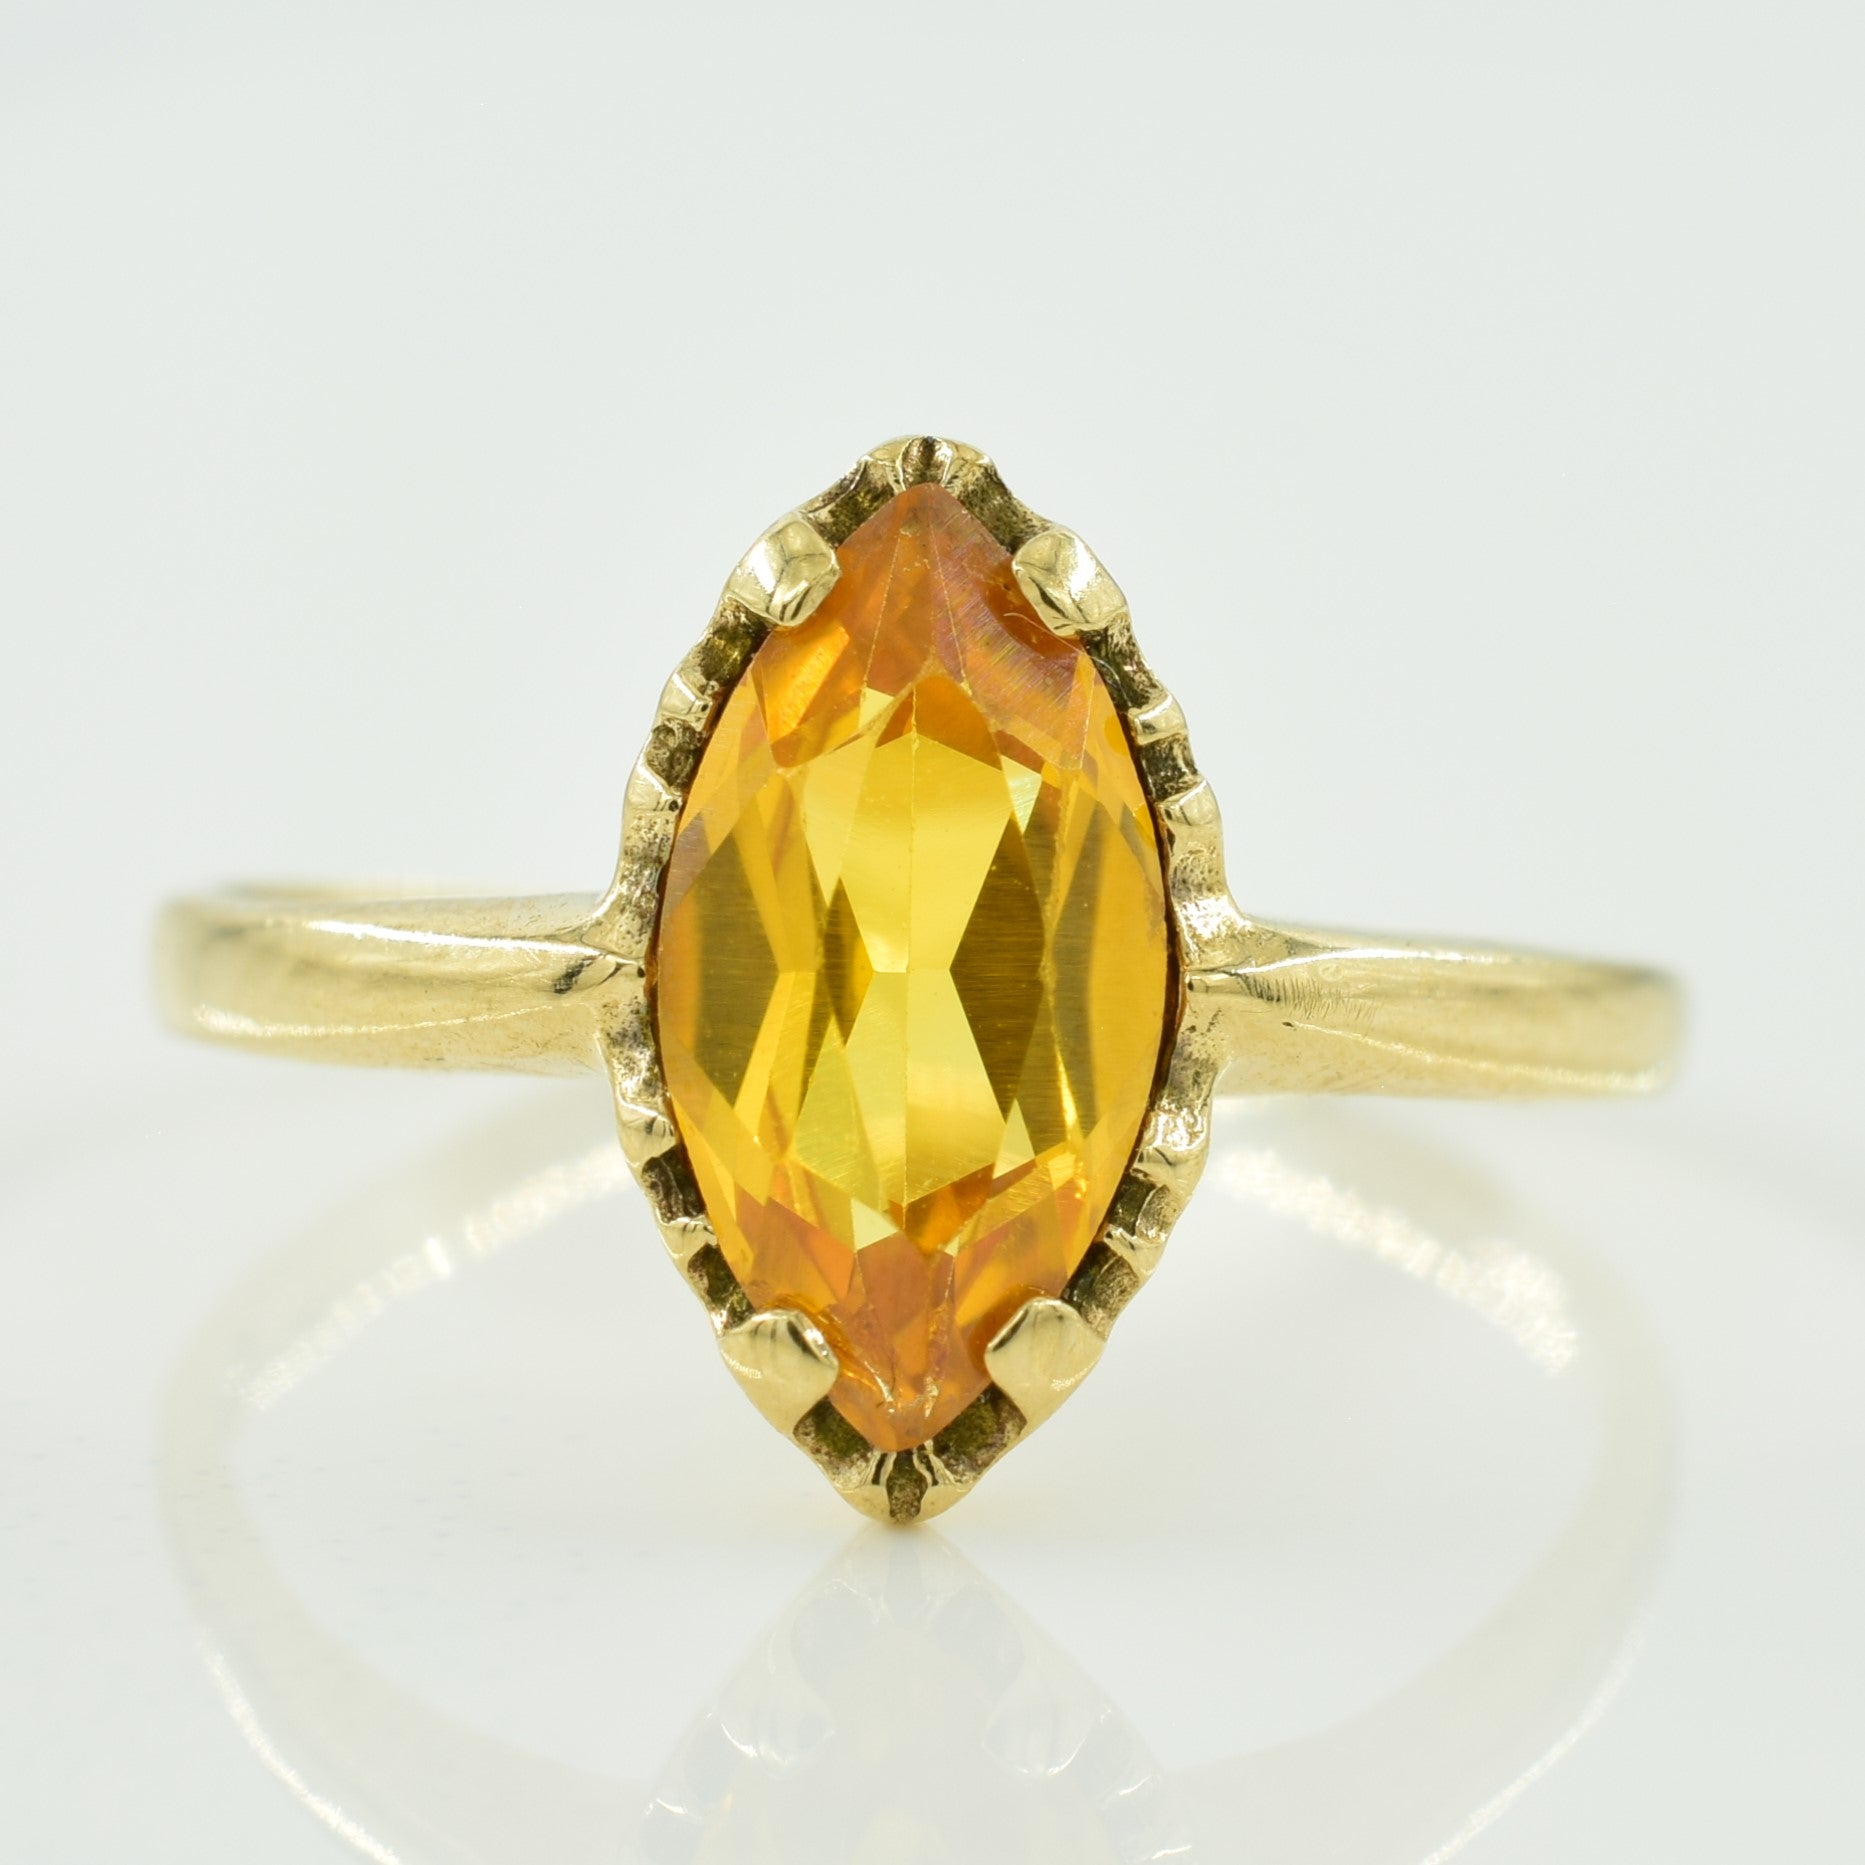 Synthetic Yellow Sapphire Ring | 1.00ct | SZ 5.25 |